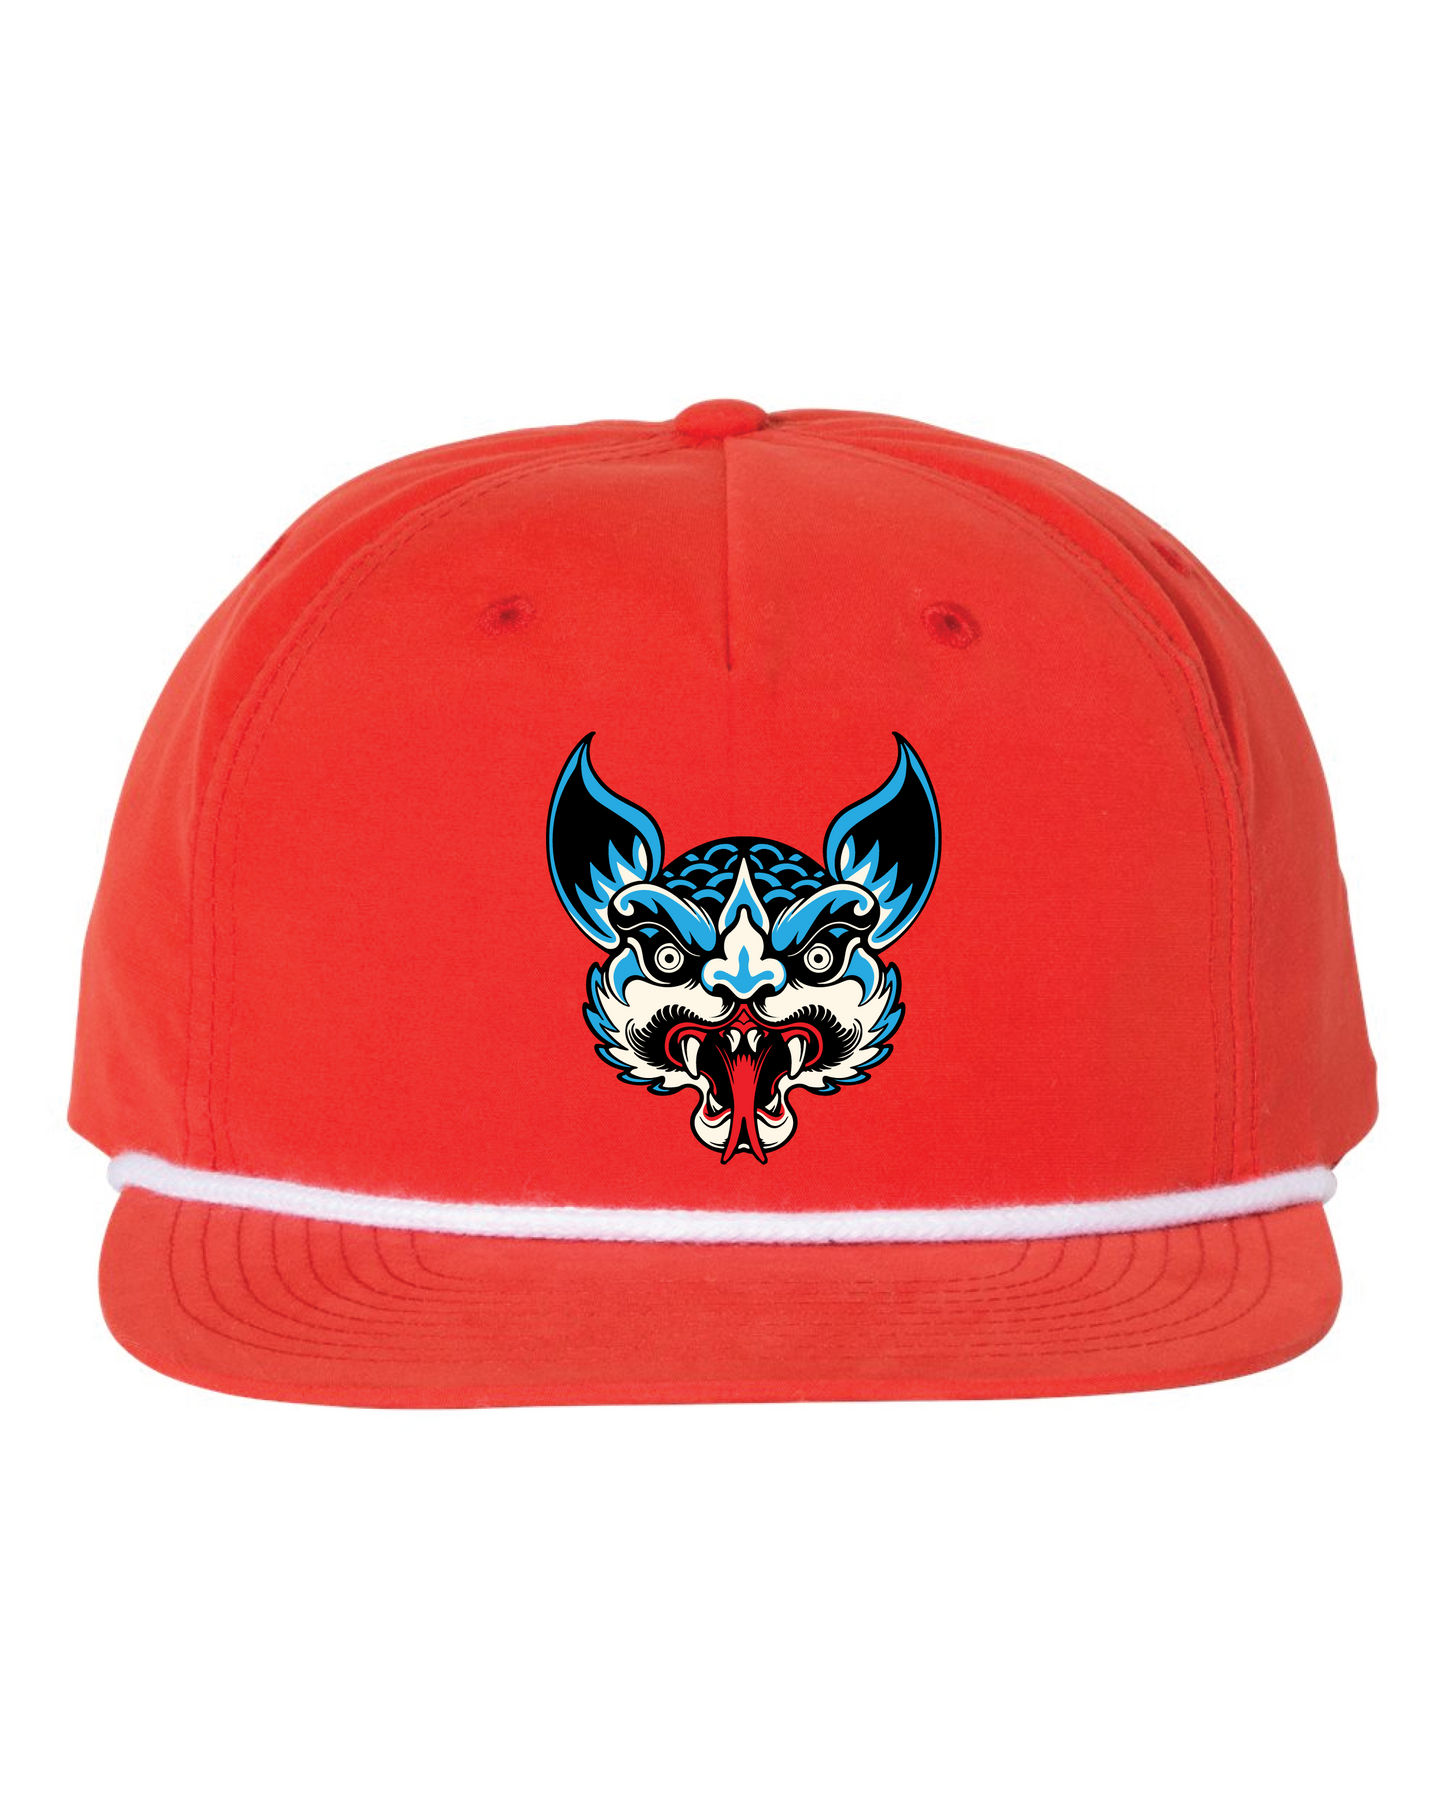 Bat Country - Rope Hat